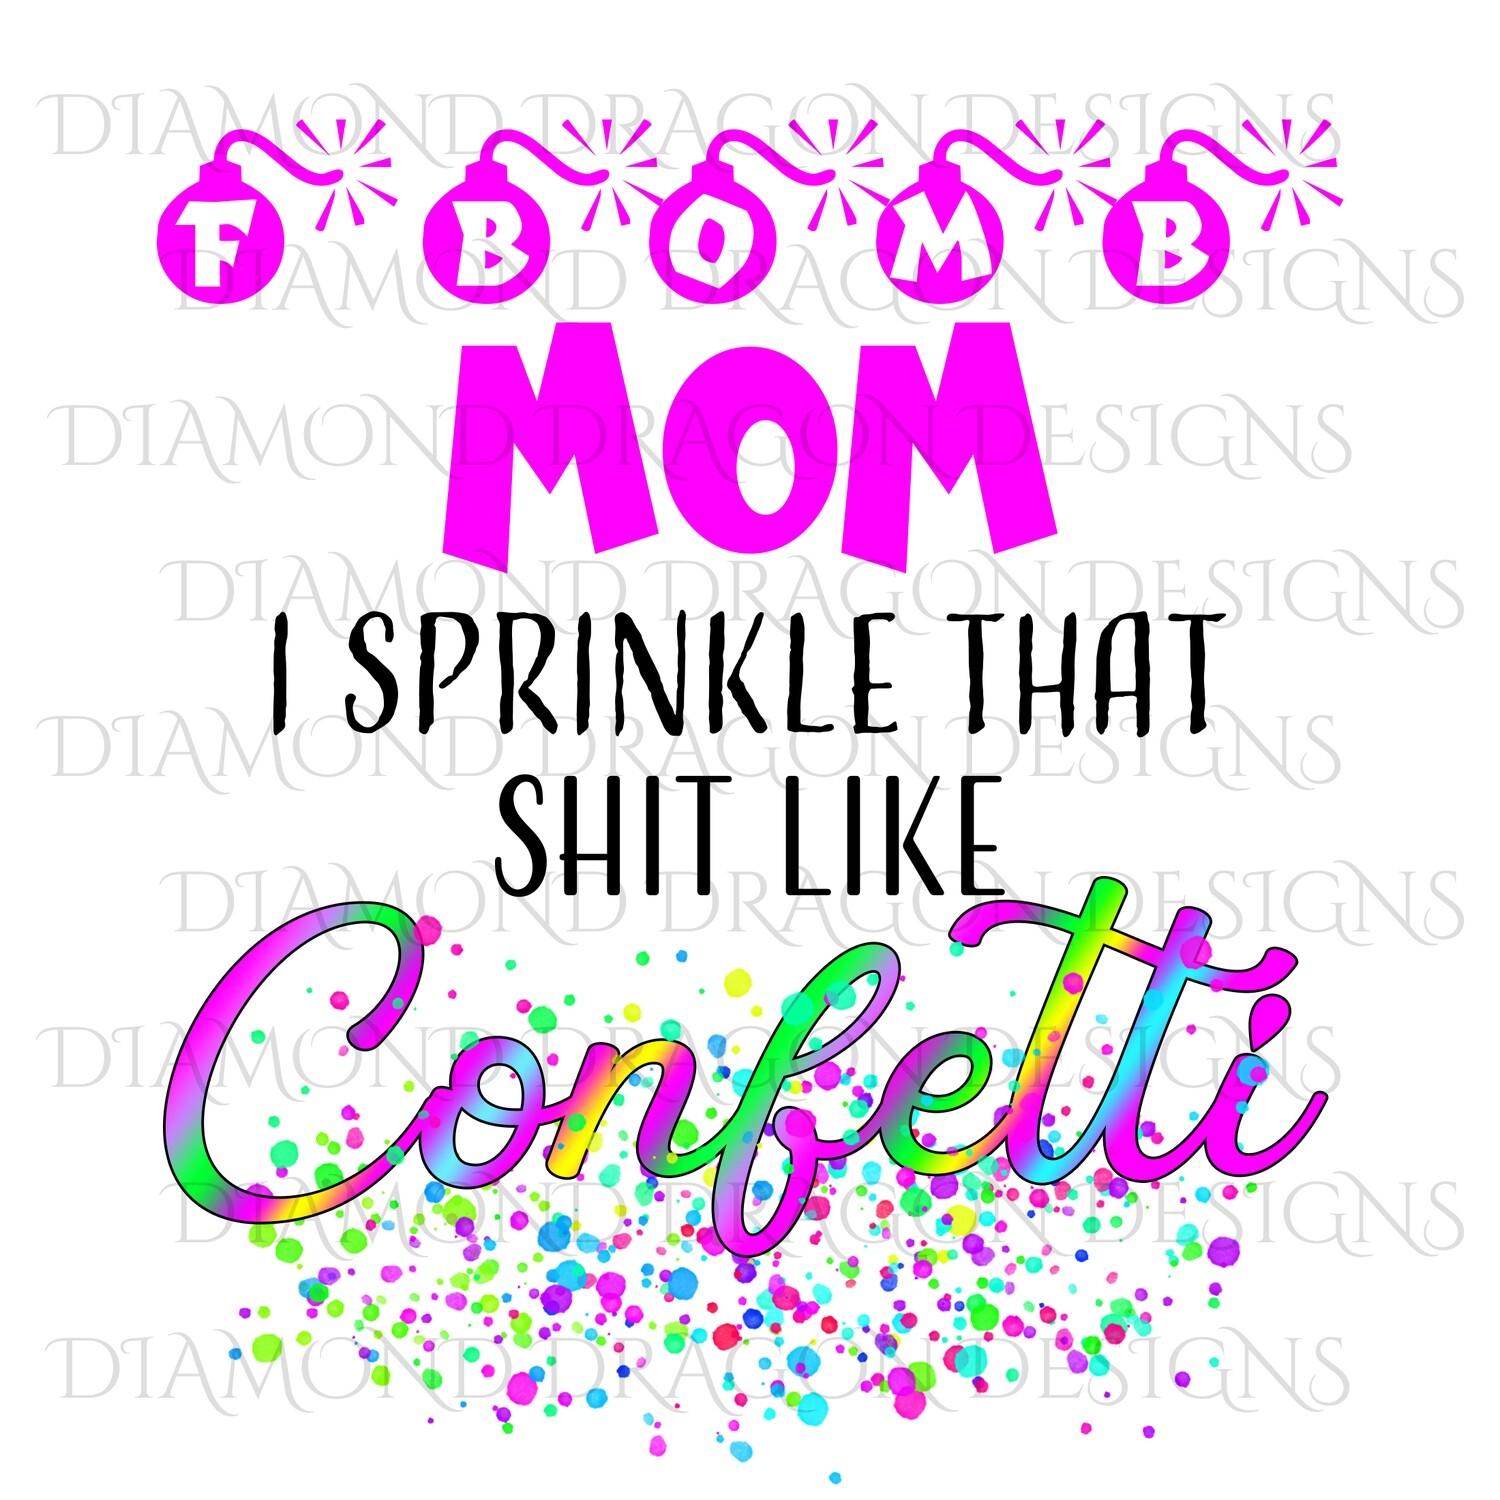 Quotes - F Bomb Mom, F- Bomb Mom, I Sprinkle that Shit Like Confetti, Waterslide